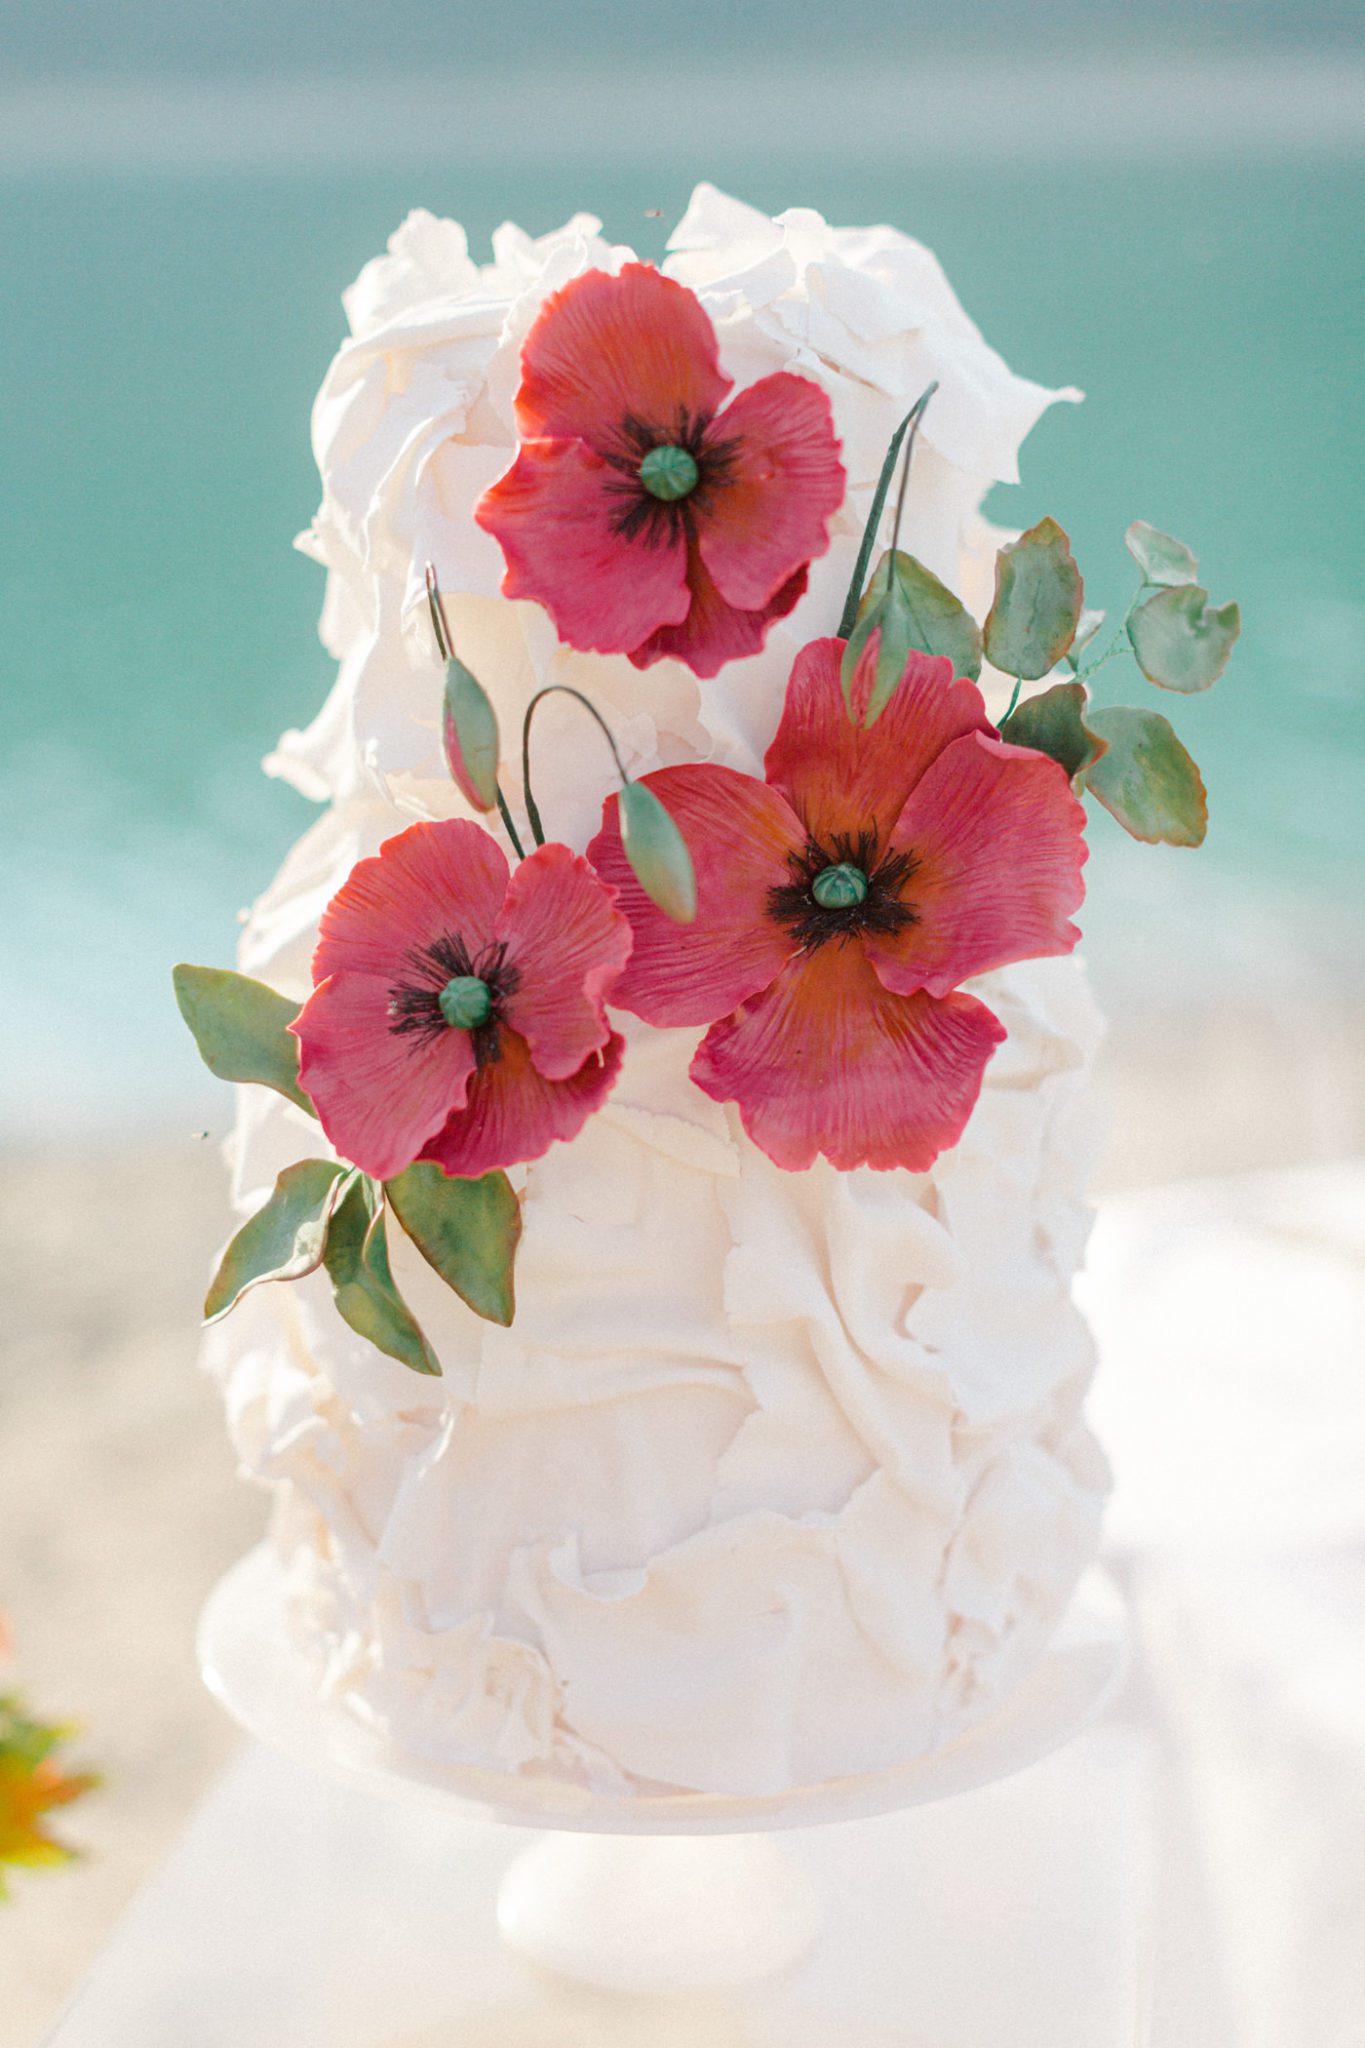 Two tiered white ruffle cake with red poppy sugar flowers